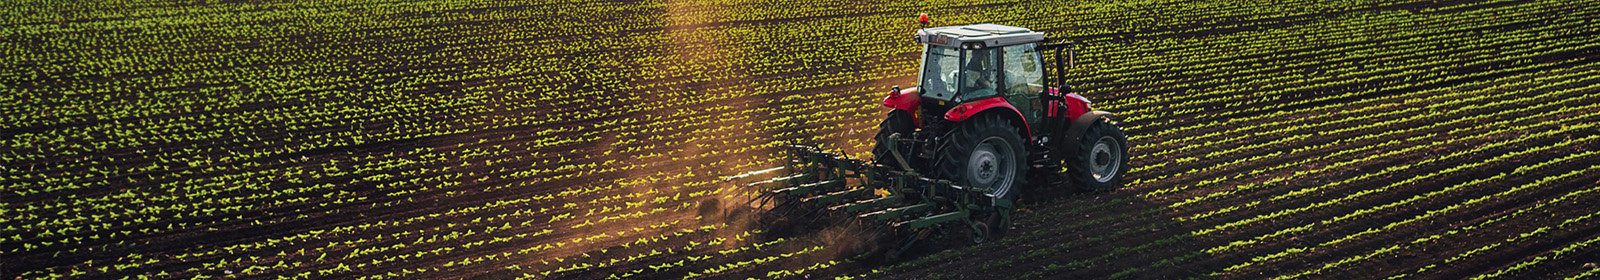 red tractor pulling a cultivator through crop field